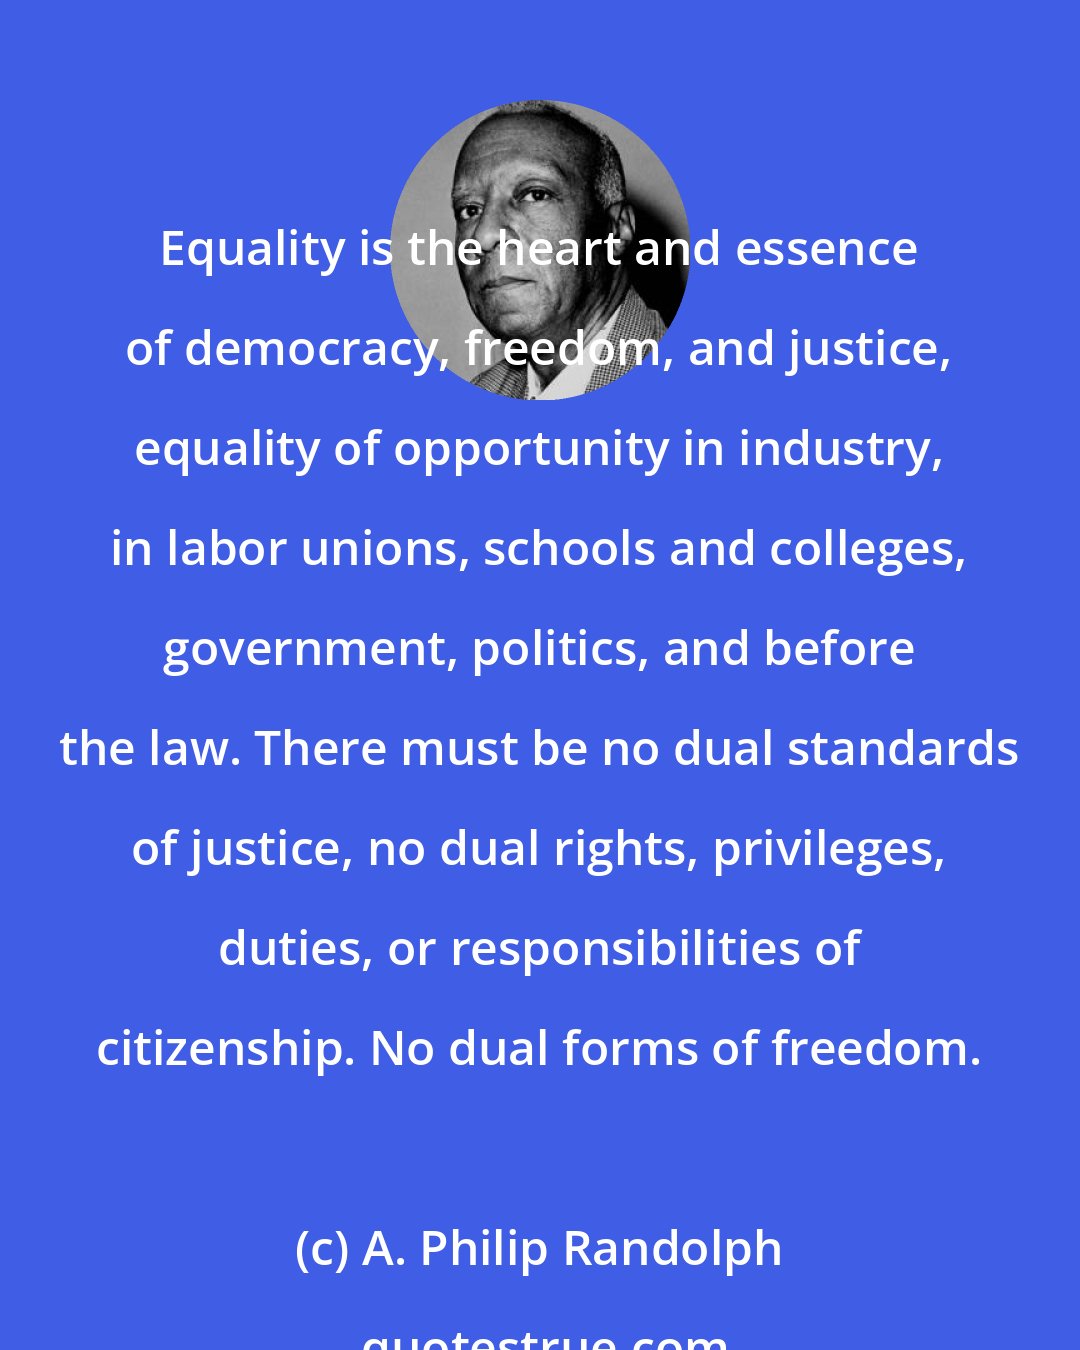 A. Philip Randolph: Equality is the heart and essence of democracy, freedom, and justice, equality of opportunity in industry, in labor unions, schools and colleges, government, politics, and before the law. There must be no dual standards of justice, no dual rights, privileges, duties, or responsibilities of citizenship. No dual forms of freedom.